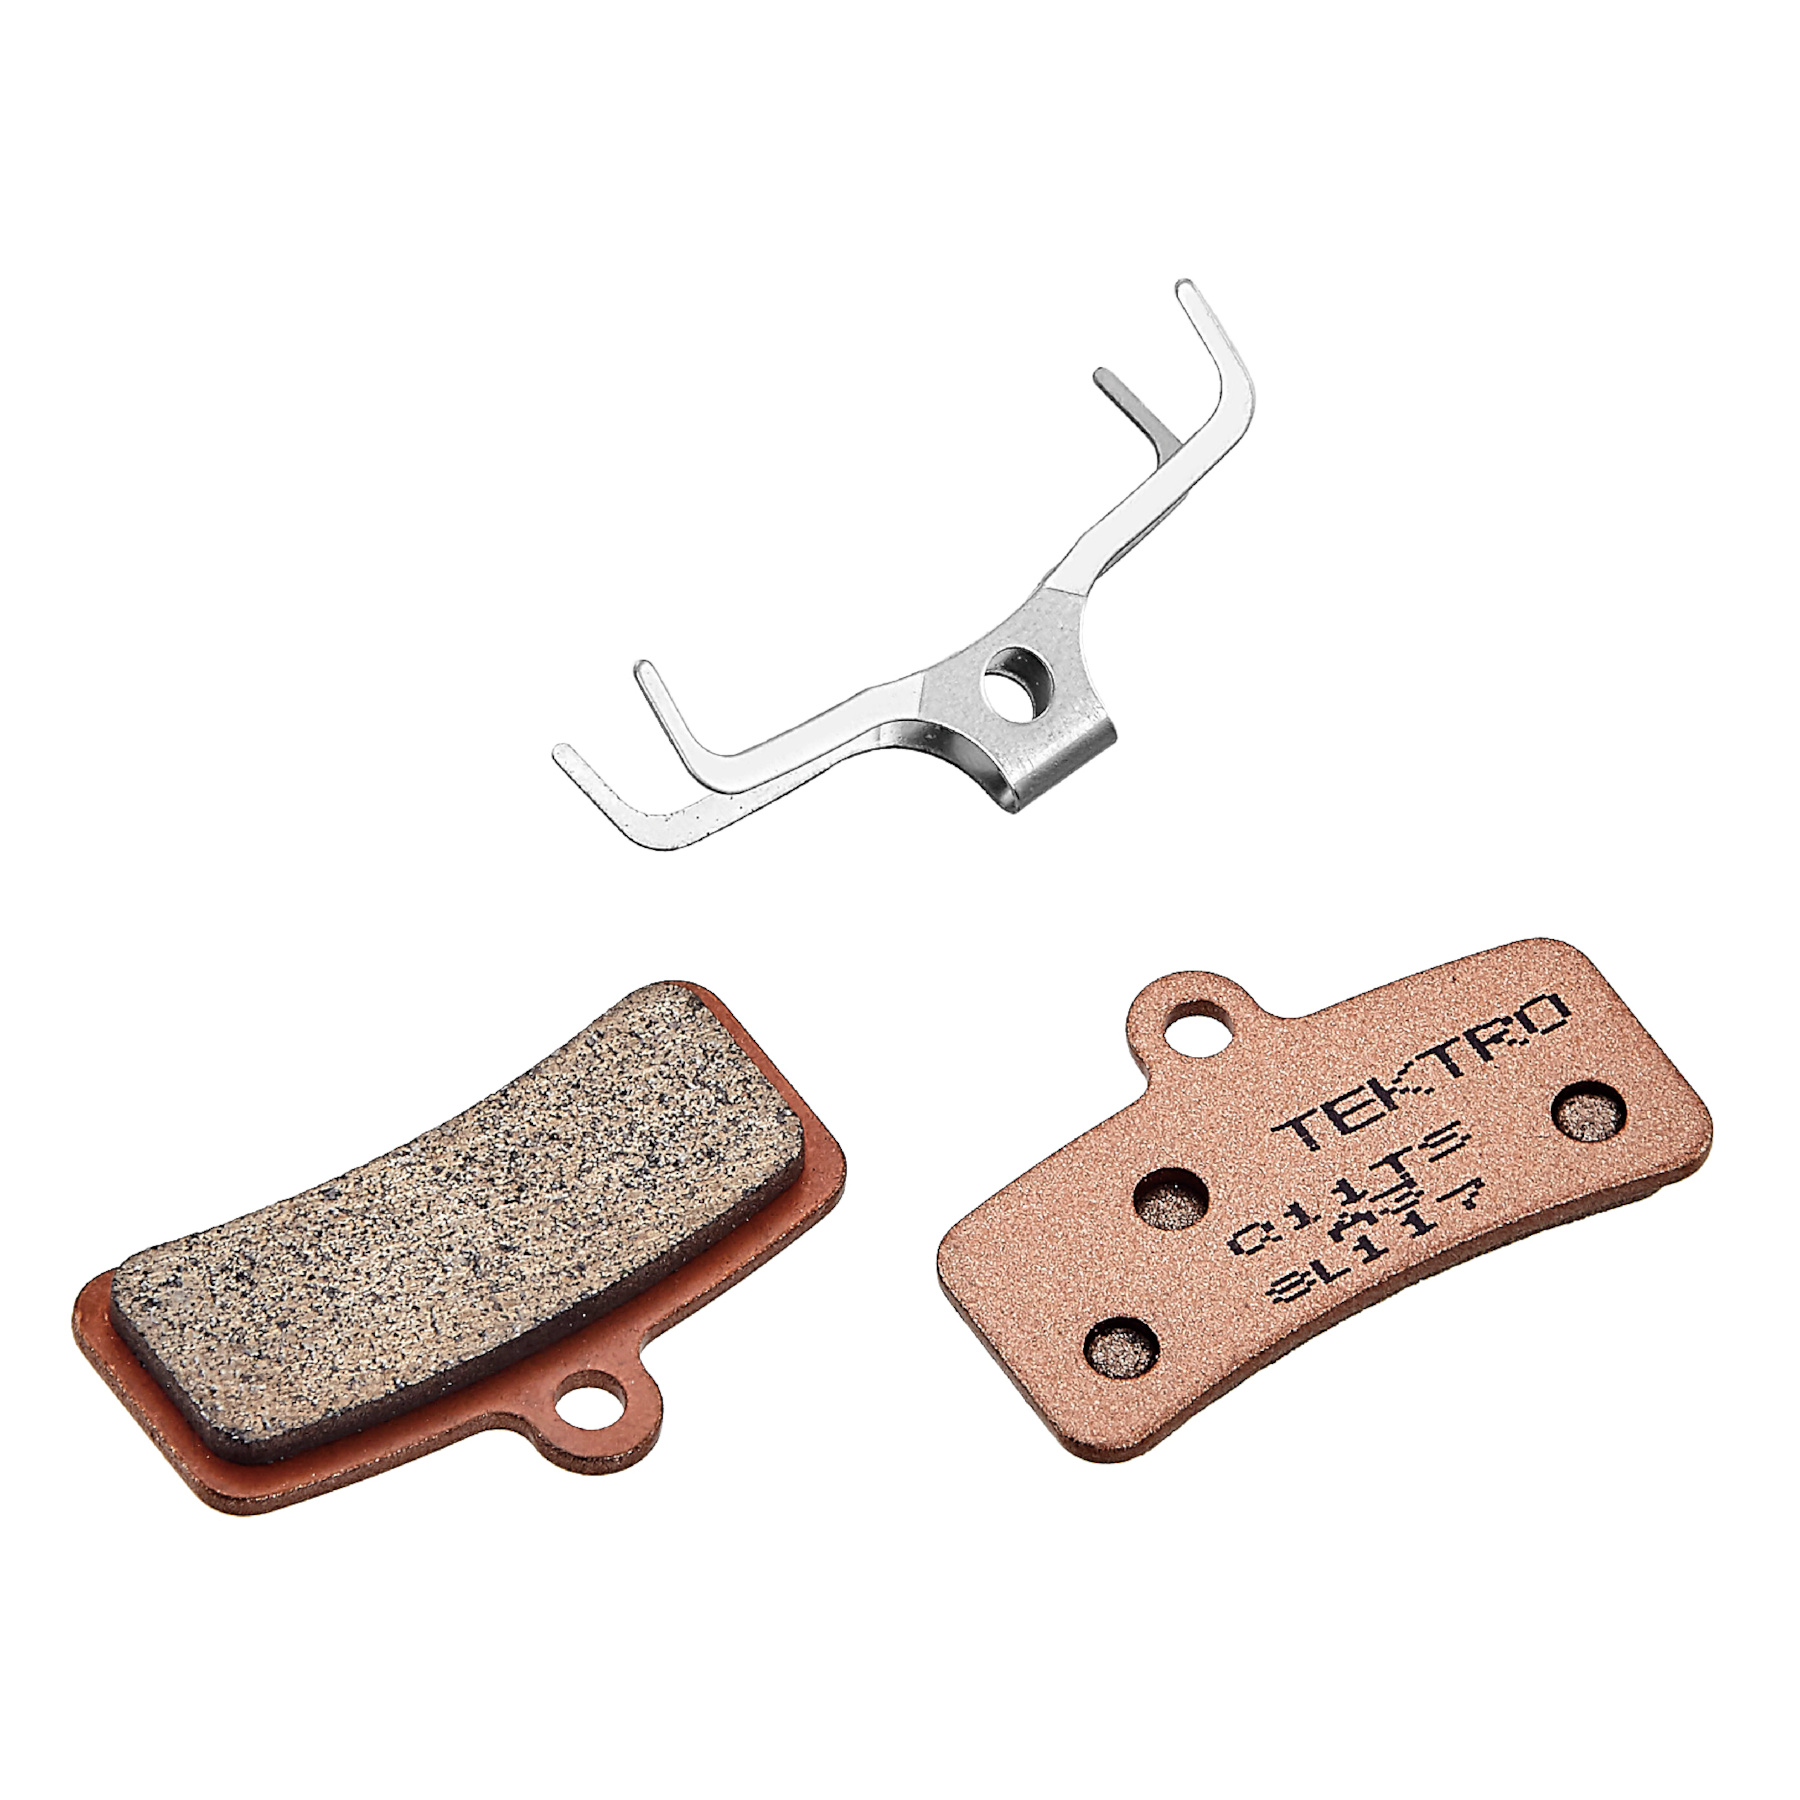 Picture of Tektro Disc Brake Pads for HD-M750 / HD-M745 - Q11TS - sintered metal